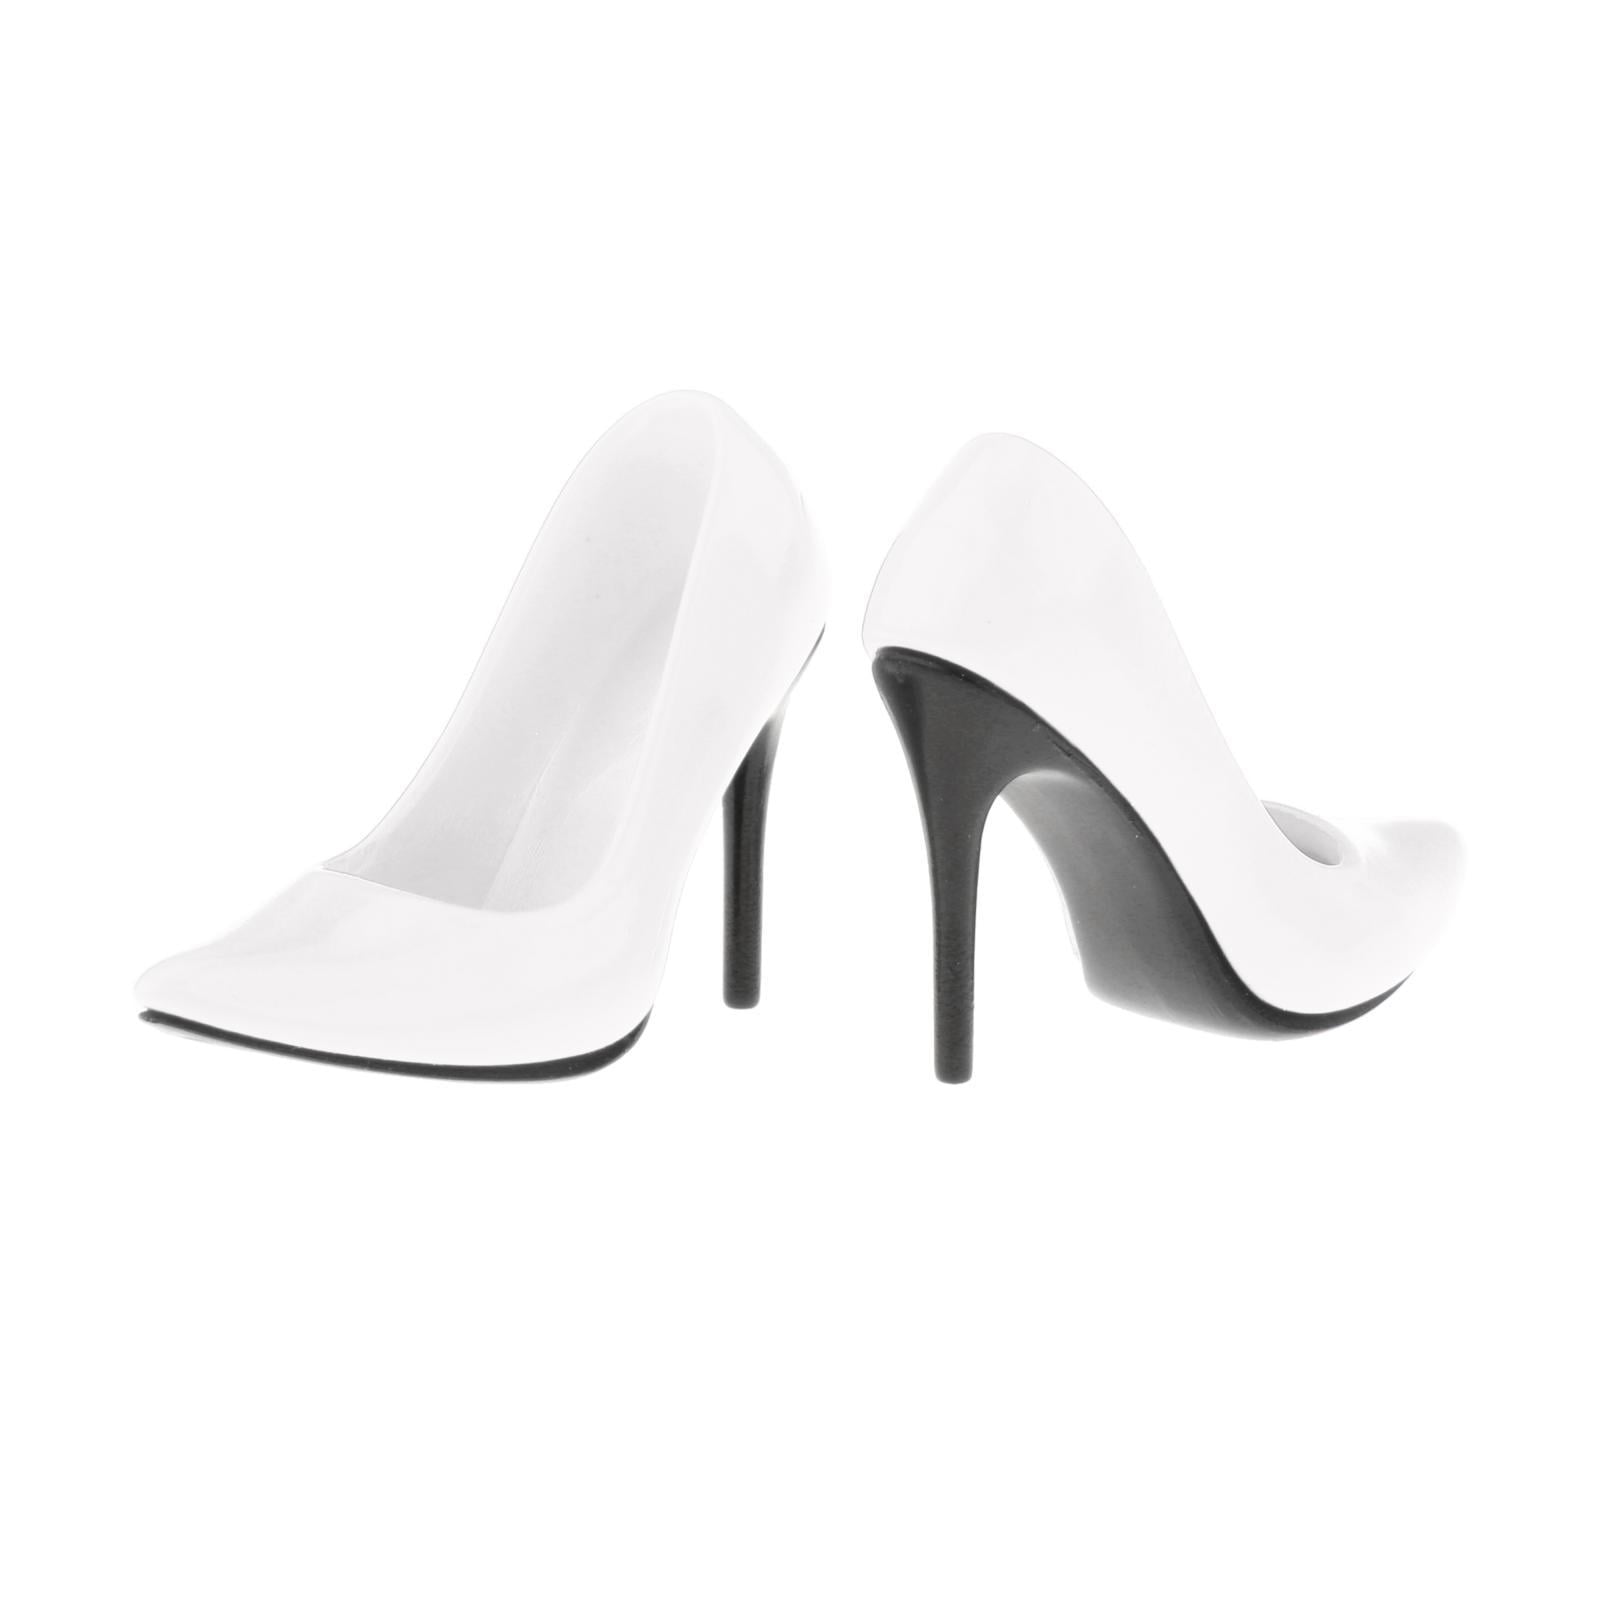 2 Pairs 1/6 Scale Stiletto Heeled Shoes for 12 inch Female Figure Clothing 